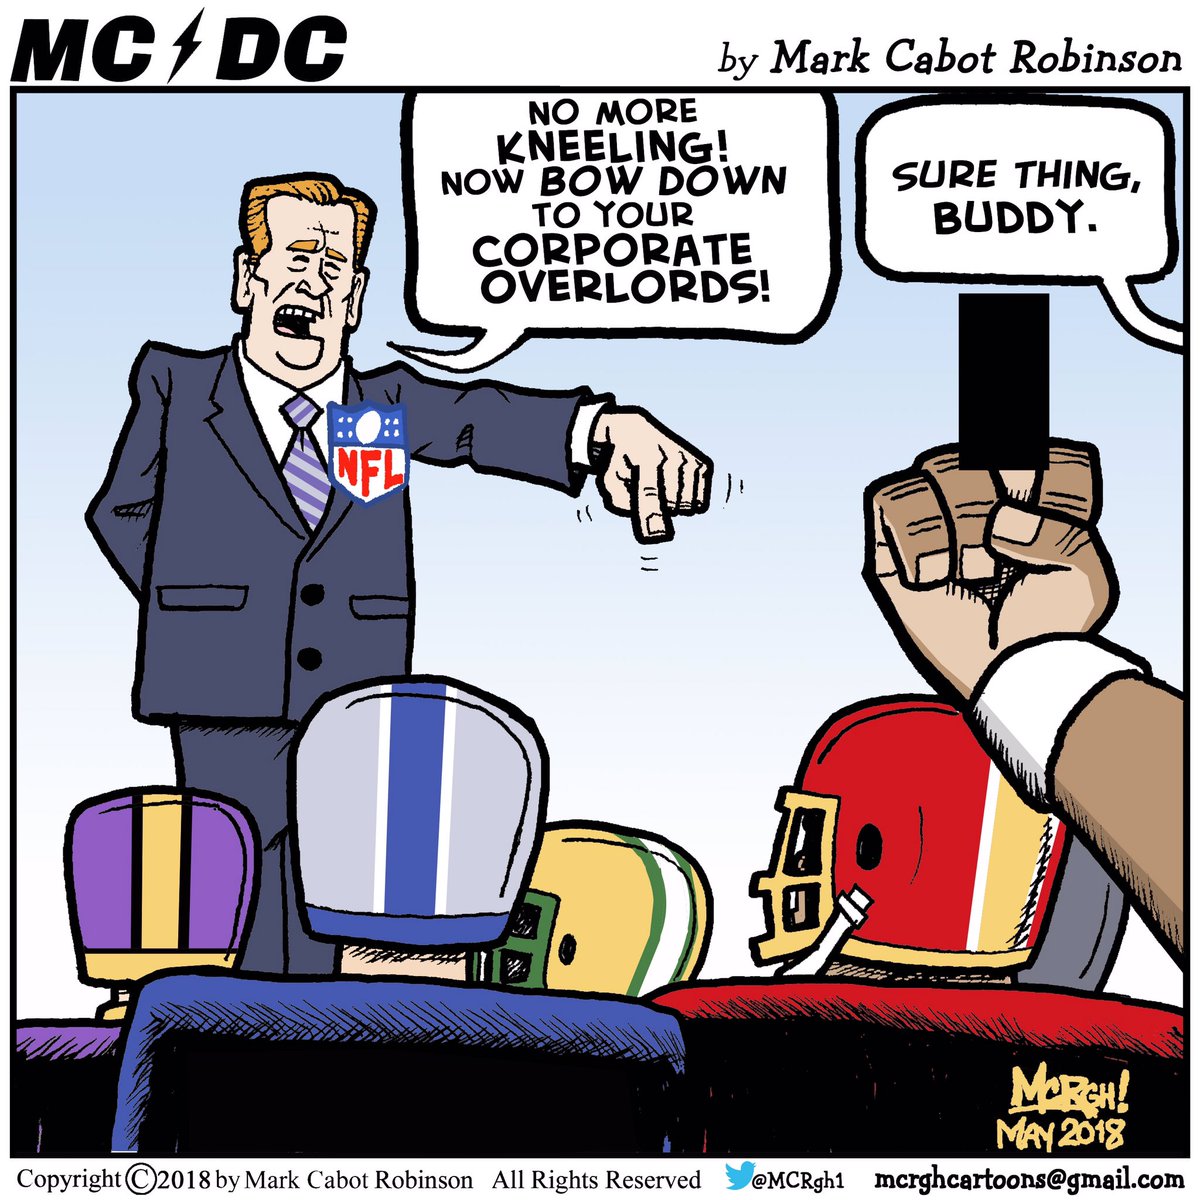 On May 10, 2019 at @MDDCPress Awards Celebration; I won 1st place for Best #EditorialCartoon in Div. F & awarded #BestOfShow 1st time ever for “No Kneeling in Football (Anymore).”
Icing on the cake was receiving it from @BrianKarem.
@MCRgh1 @AAEC_Cartoonist @NABJ @kaltoons @CJR